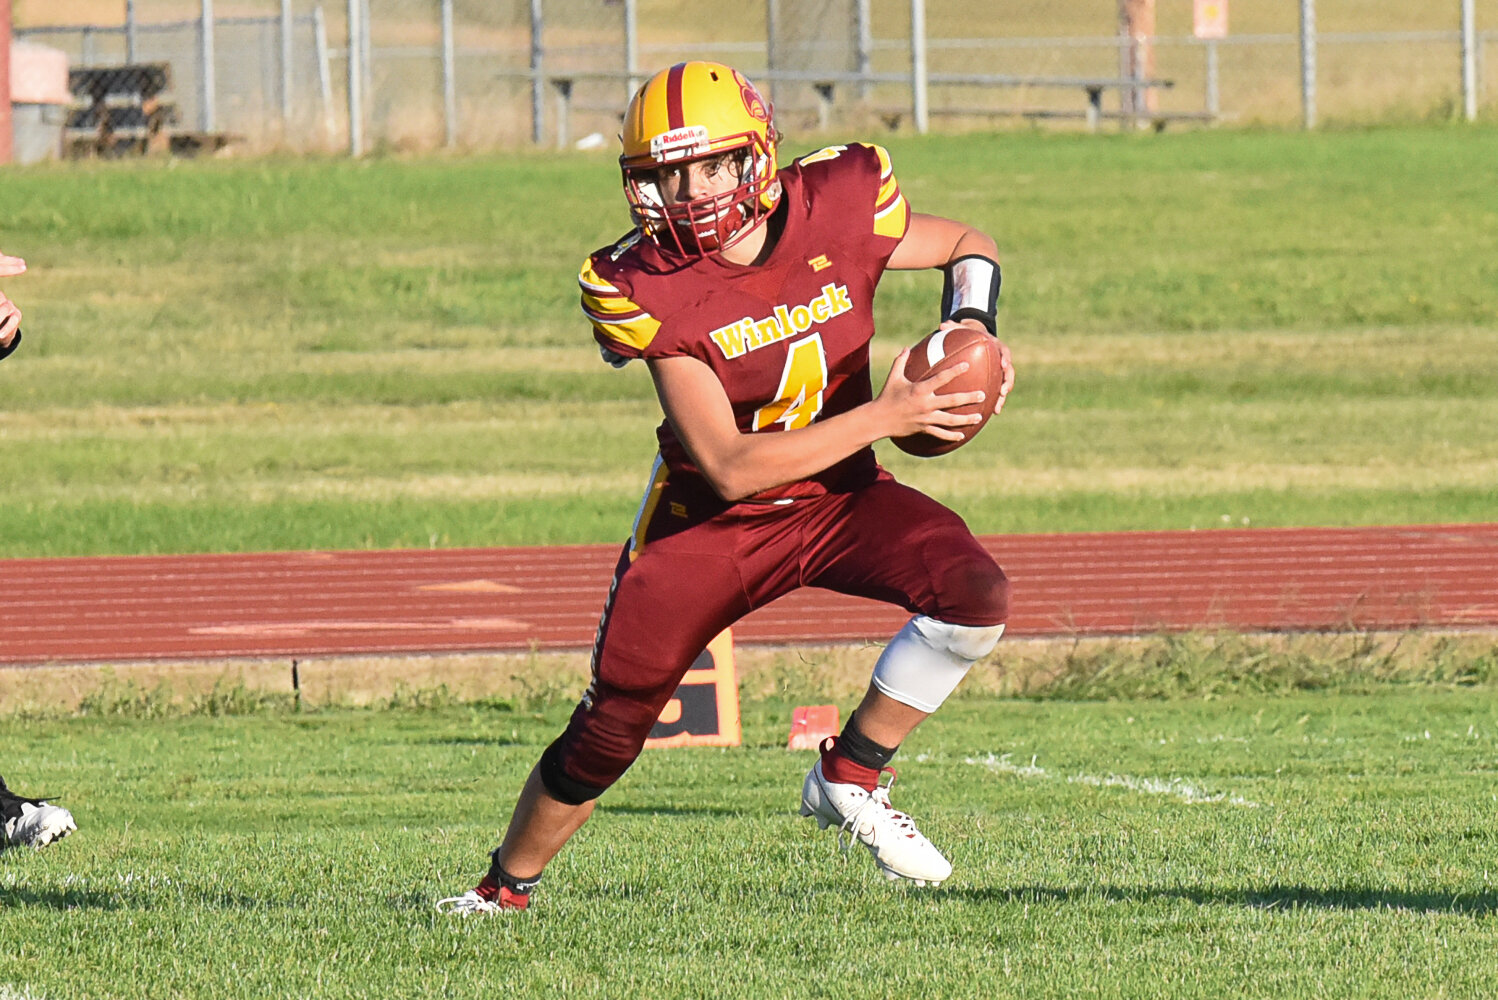 Landen Cline rushes the ball during Winlock's 56-14 loss to Darrington on Sept. 1.